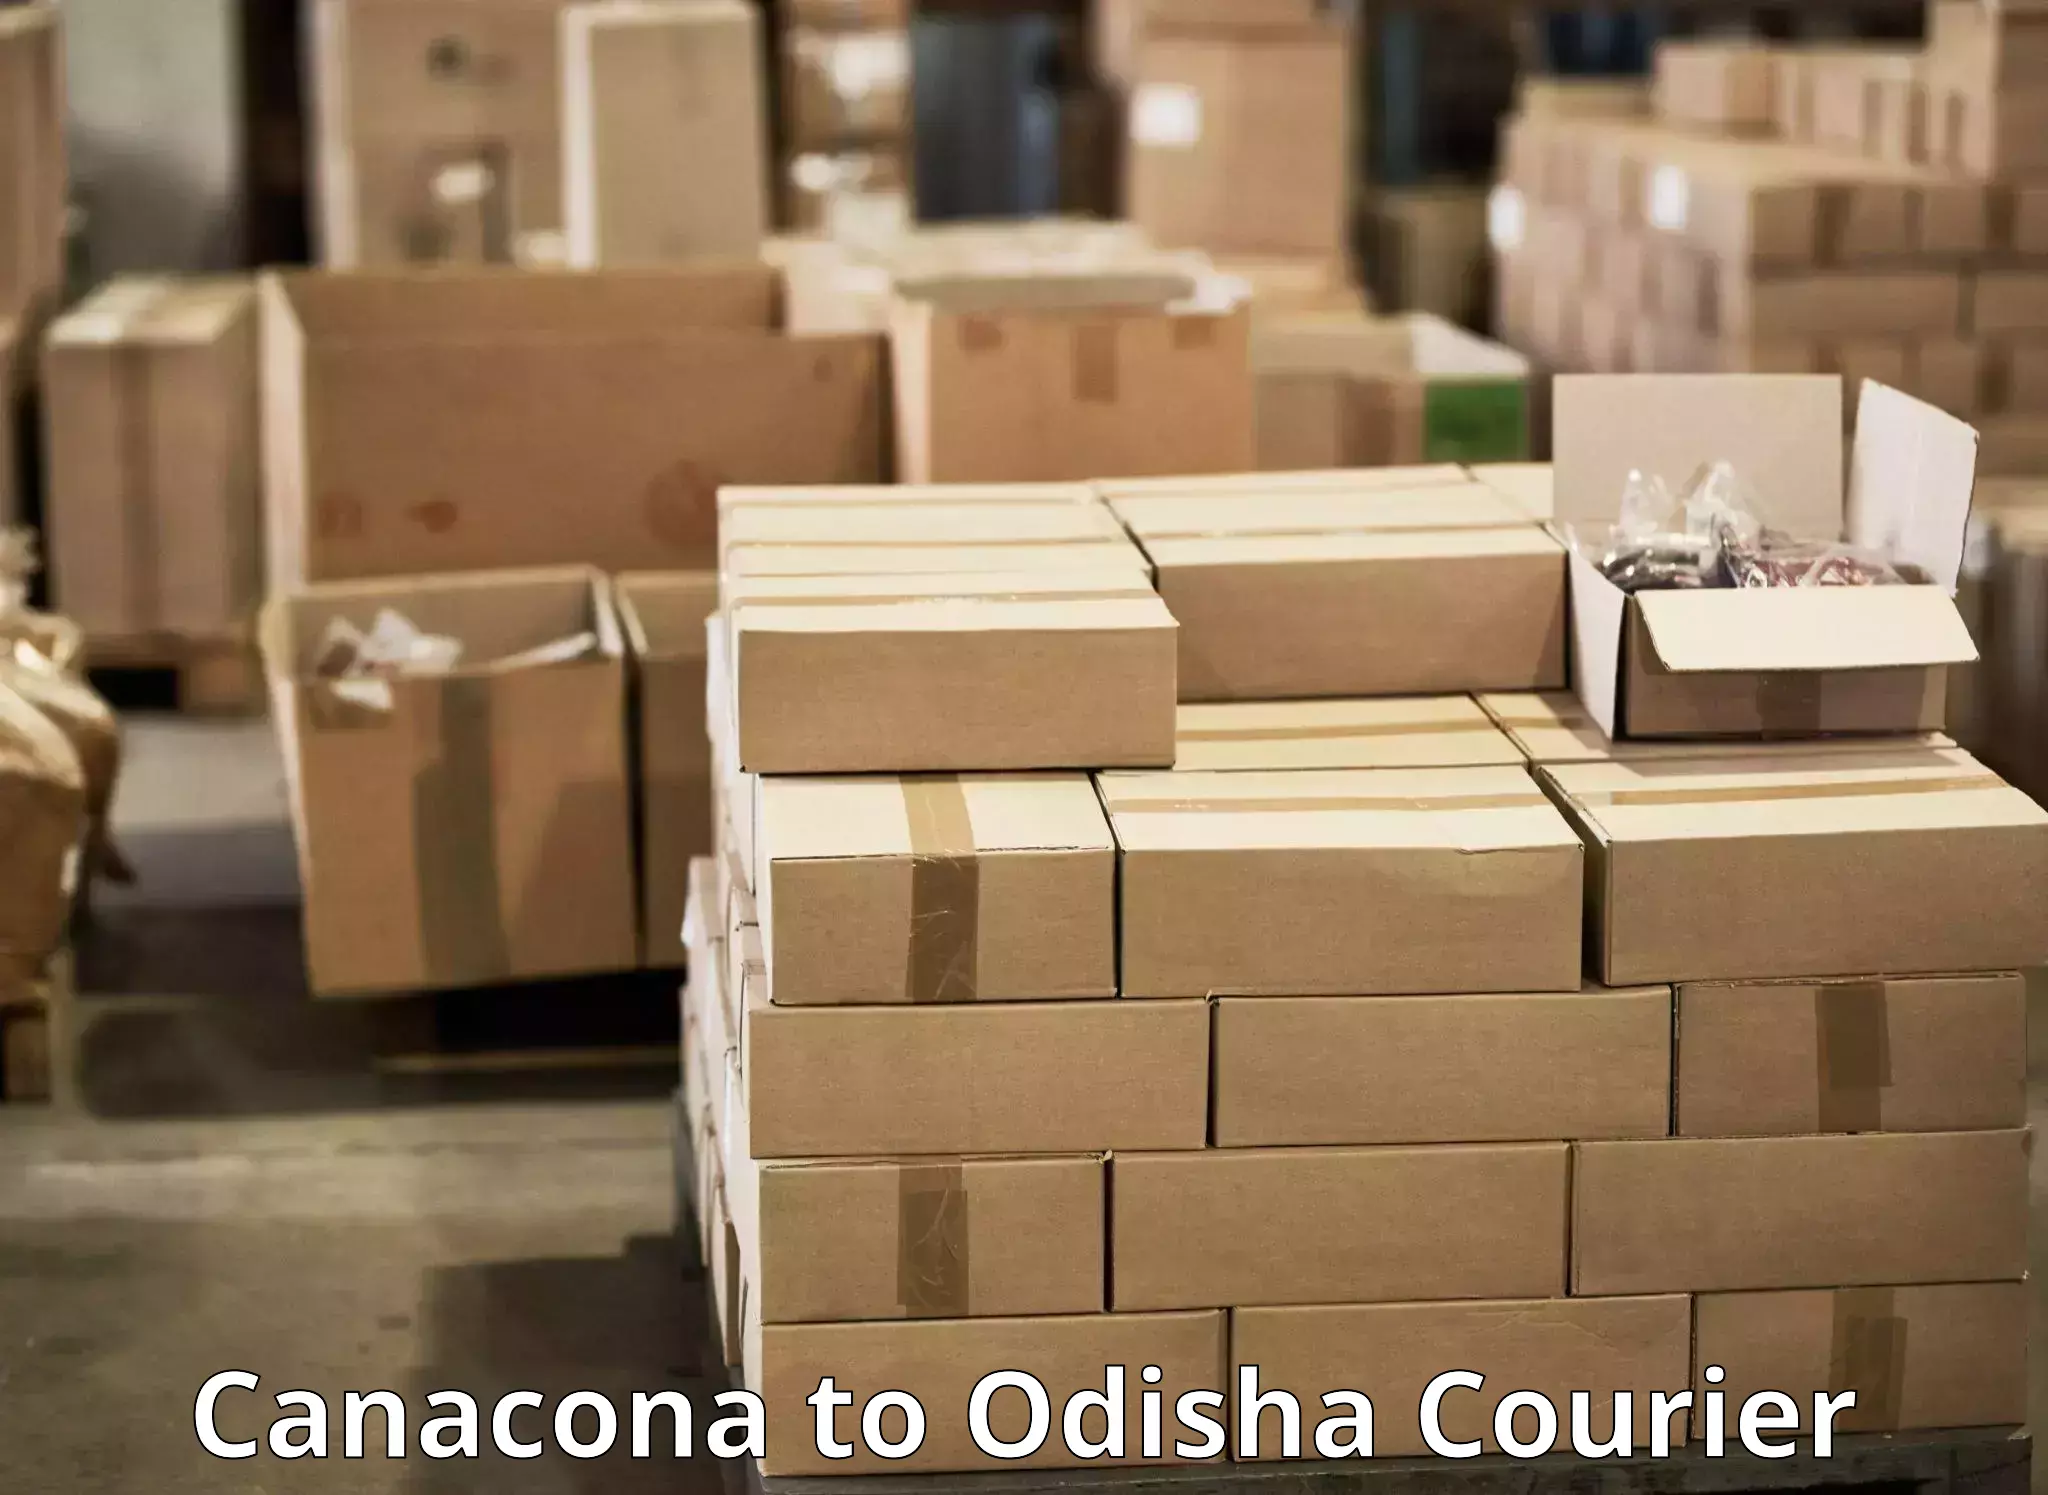 24-hour courier service Canacona to Dhenkanal